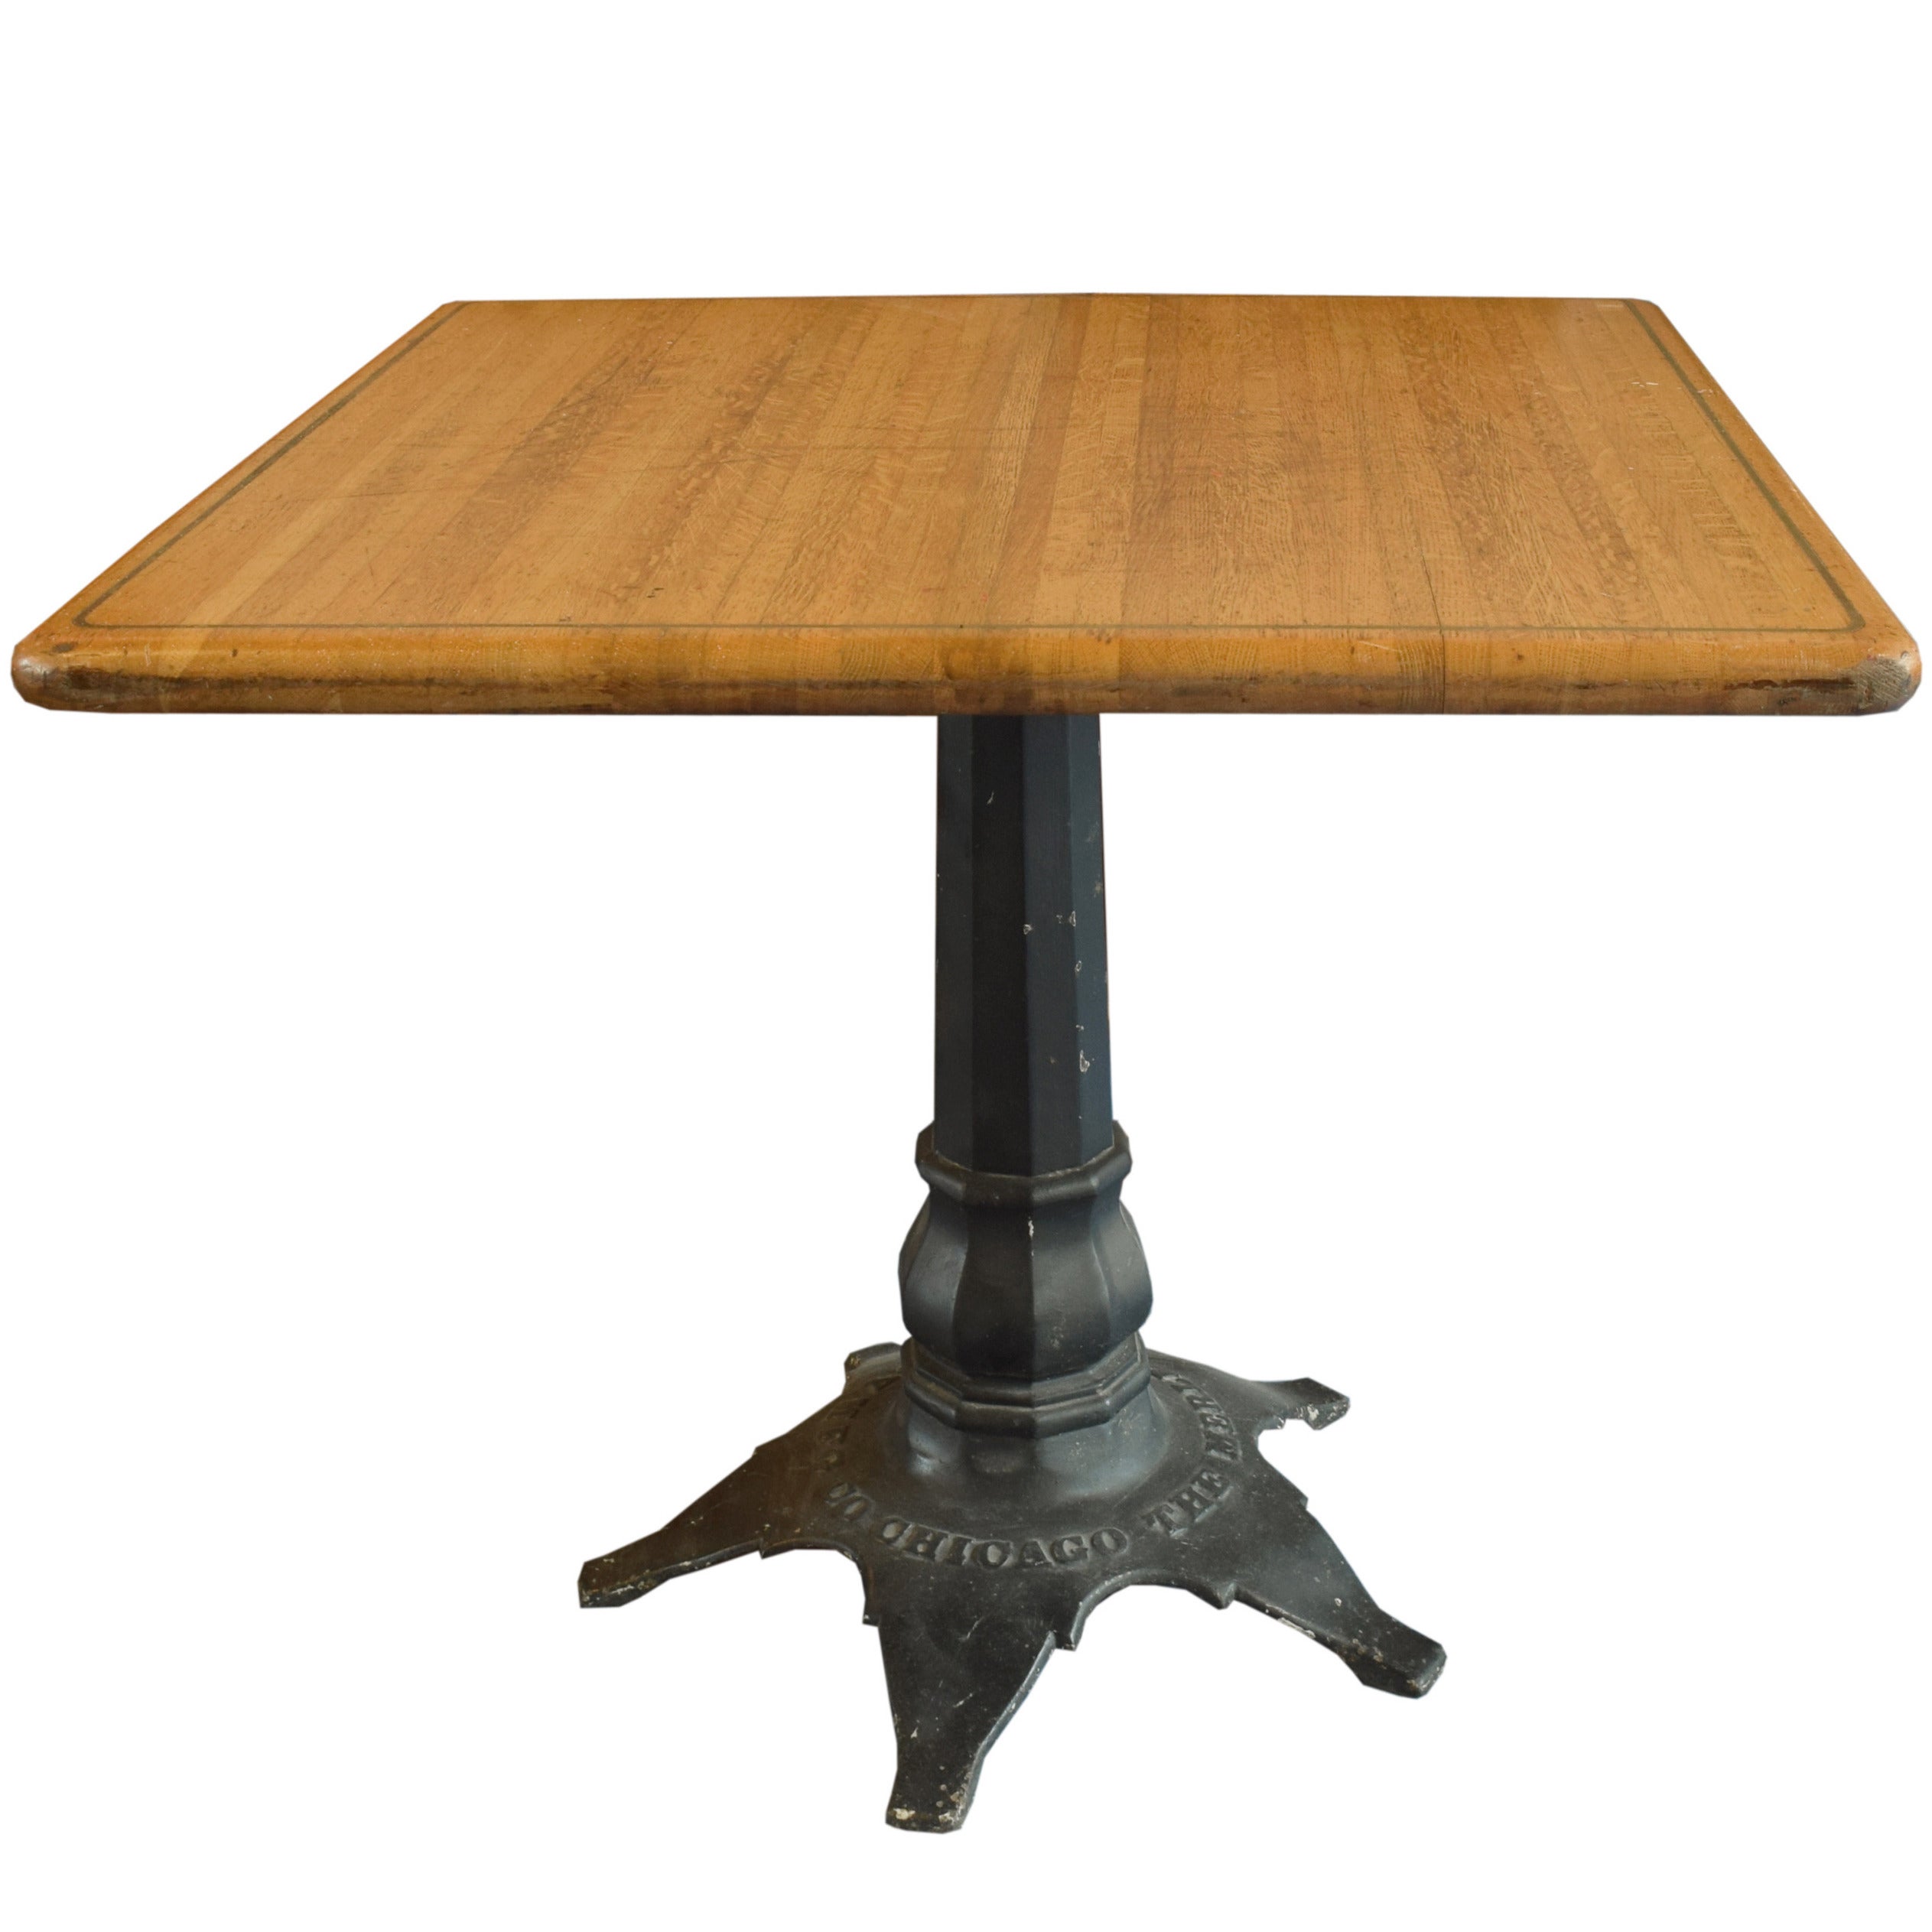 American Wood Table with Brass Inlay